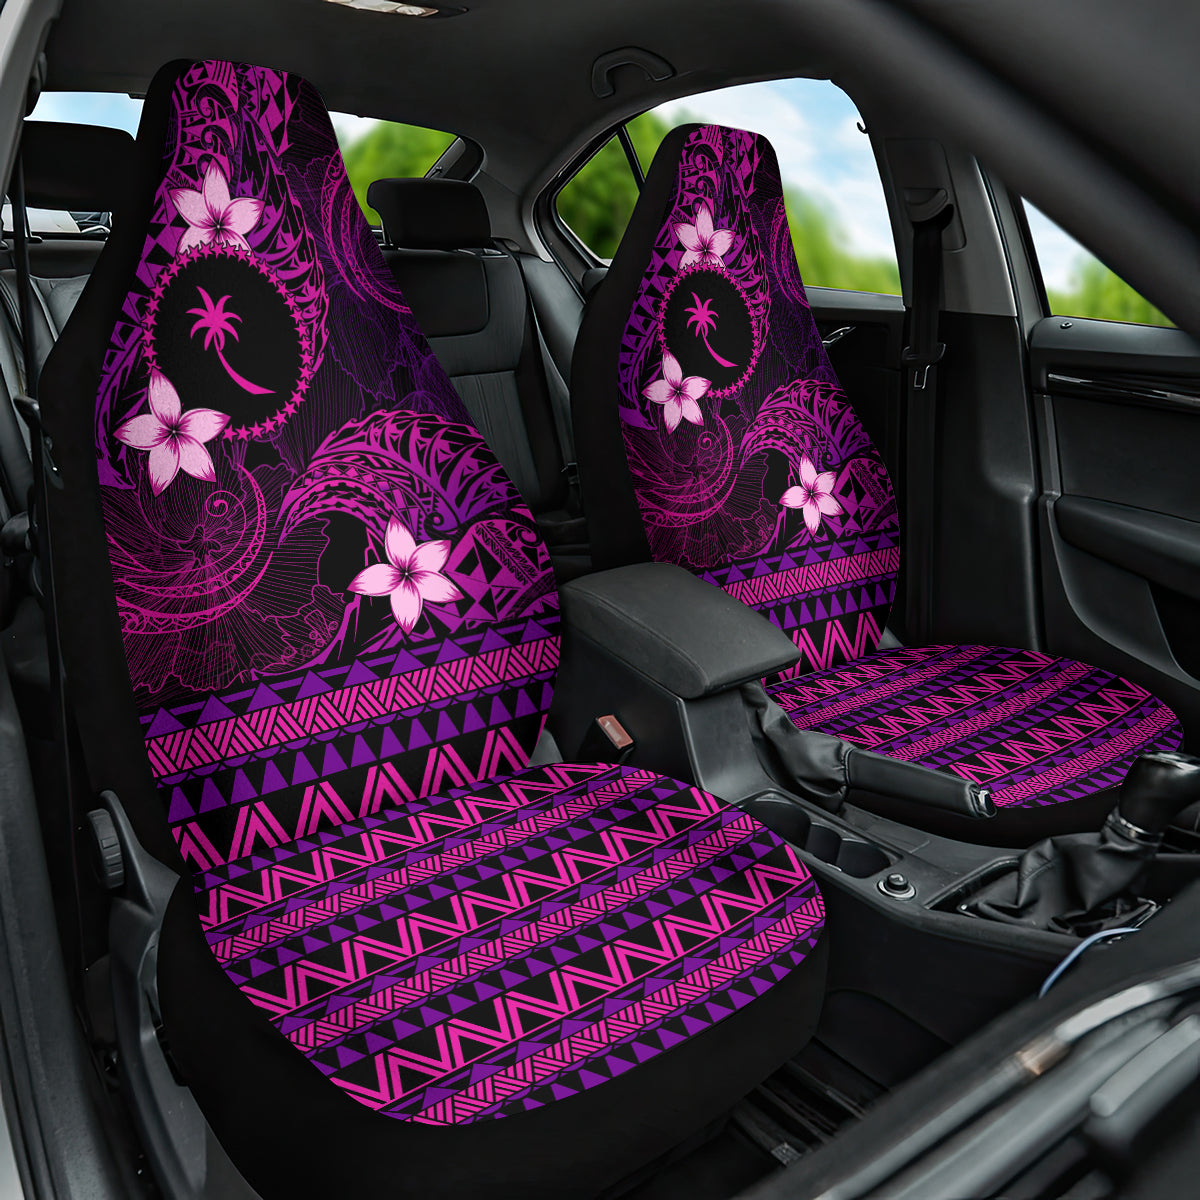 FSM Chuuk State Car Seat Cover Tribal Pattern Pink Version LT01 One Size Pink - Polynesian Pride